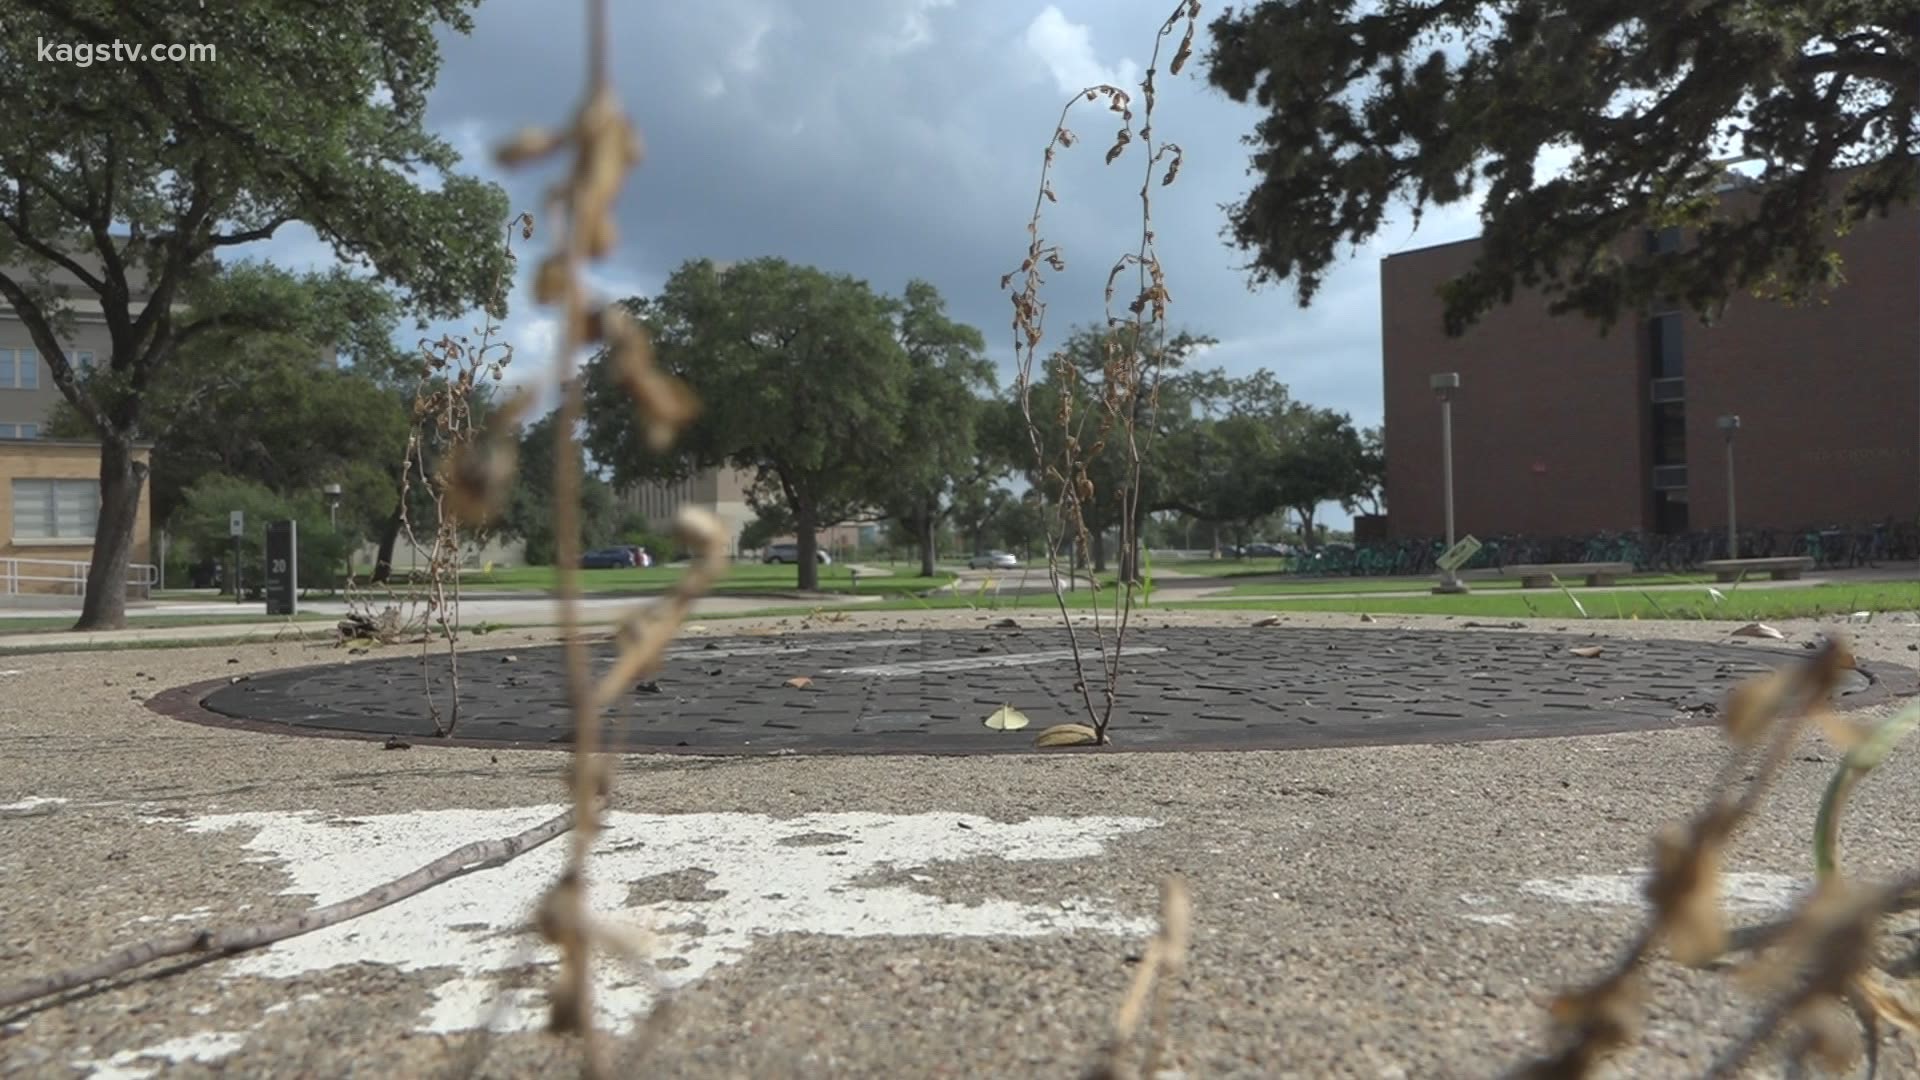 Smelly solution: TAMU using sewage to trace COVID-19 on campus